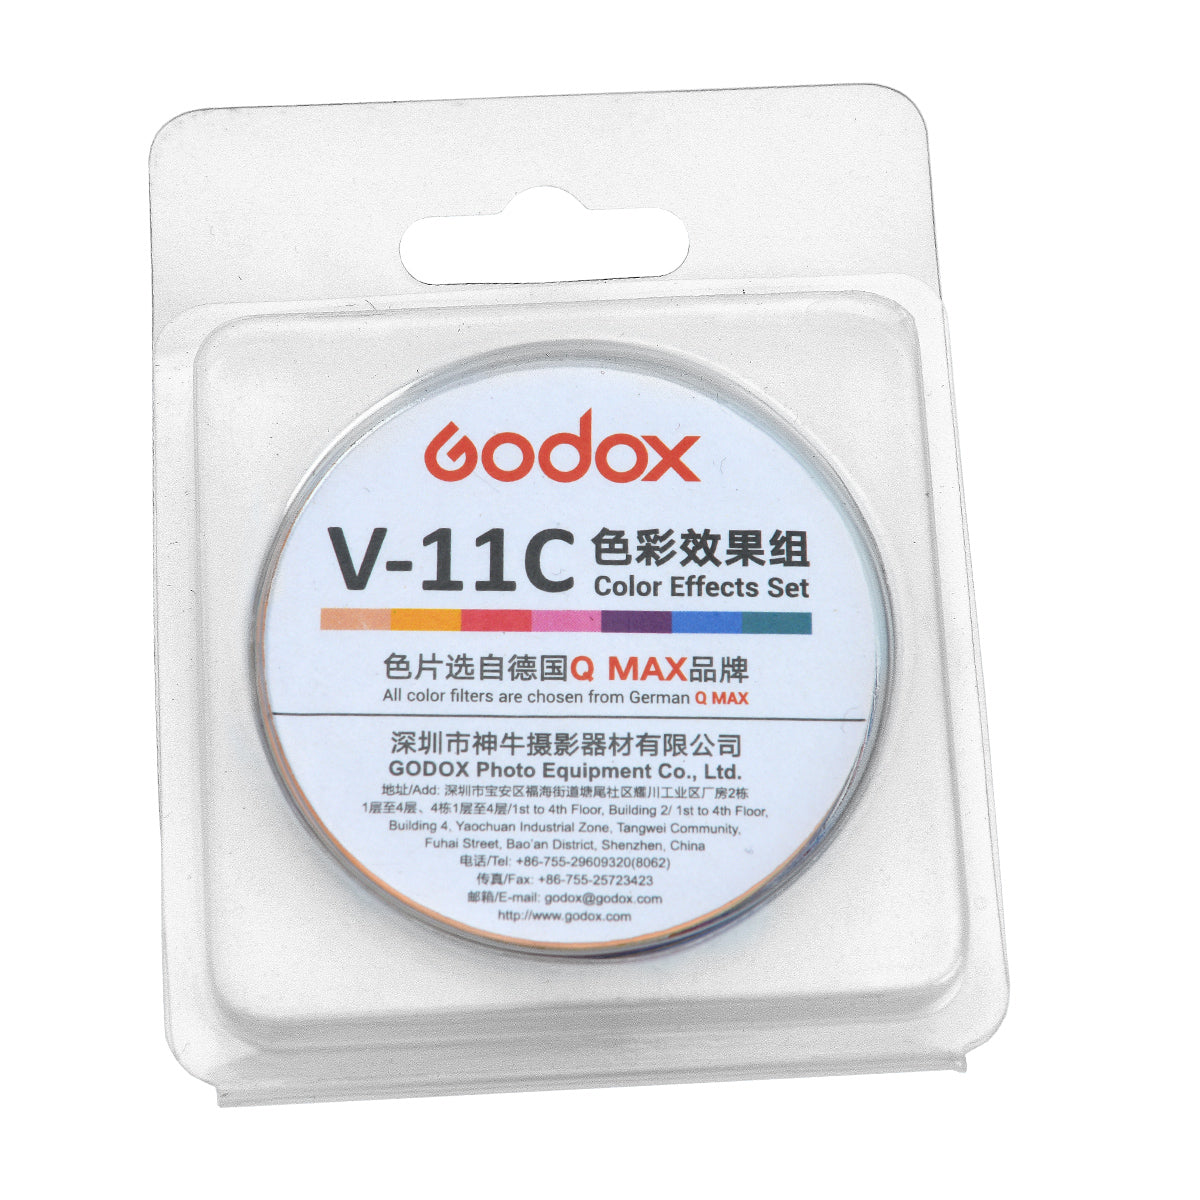 Godox V-11C Color Effects Gel Set for Round Flash Heads – MoLight